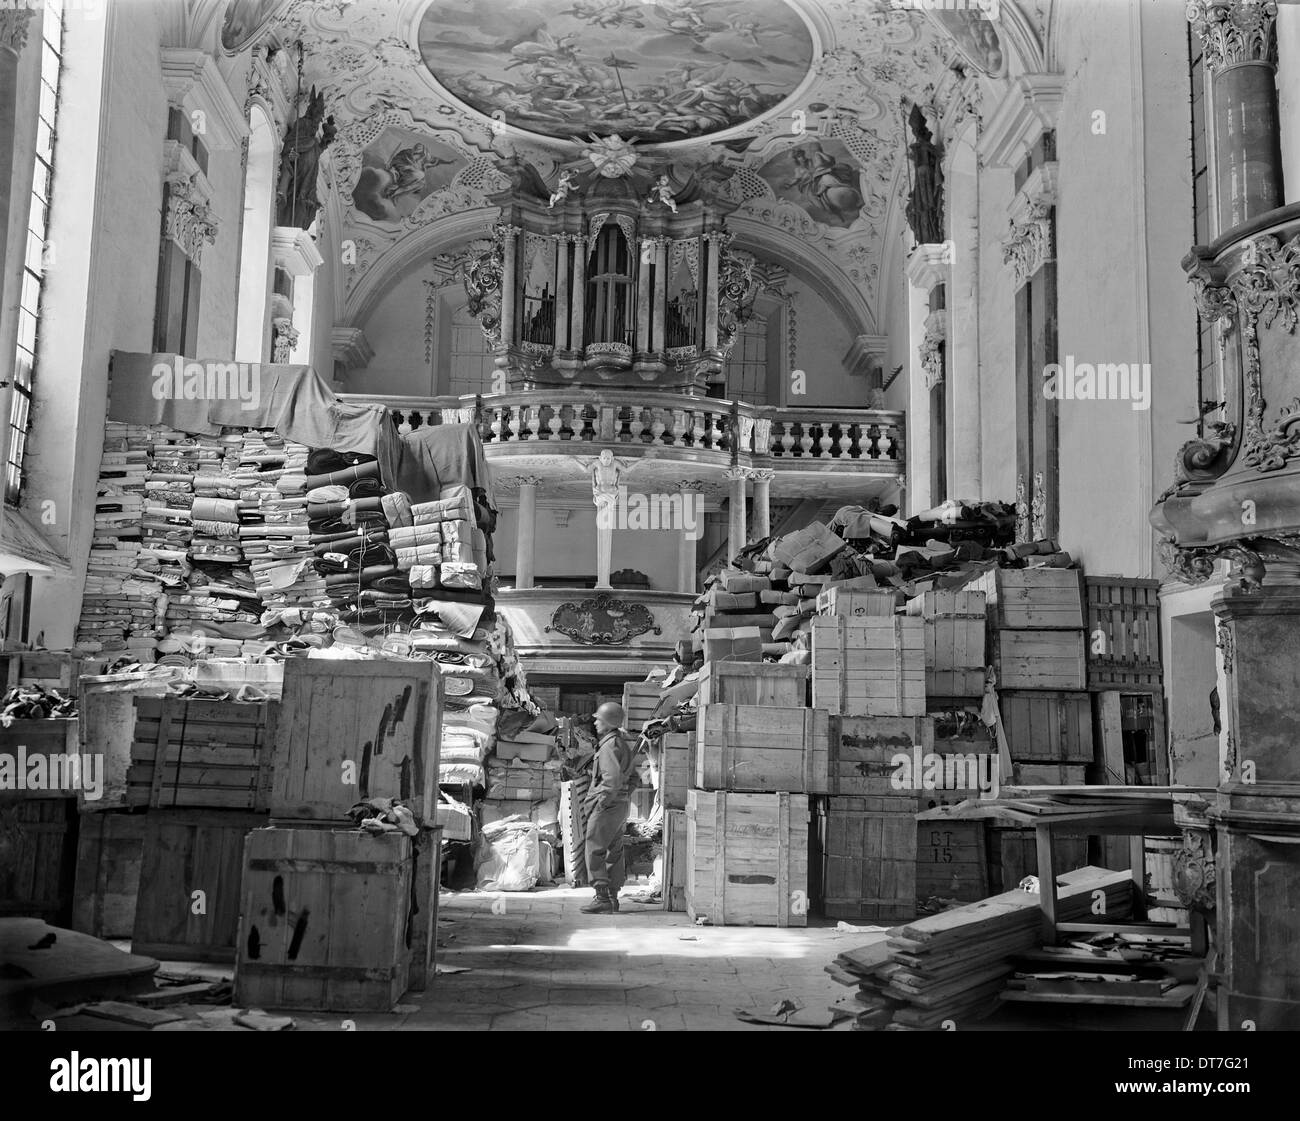 A US soldier from the Third Army views stacks of jewish owned art looted by the Nazi hidden in a church April 24, 1945 in Ellingen, Germany. Stock Photo